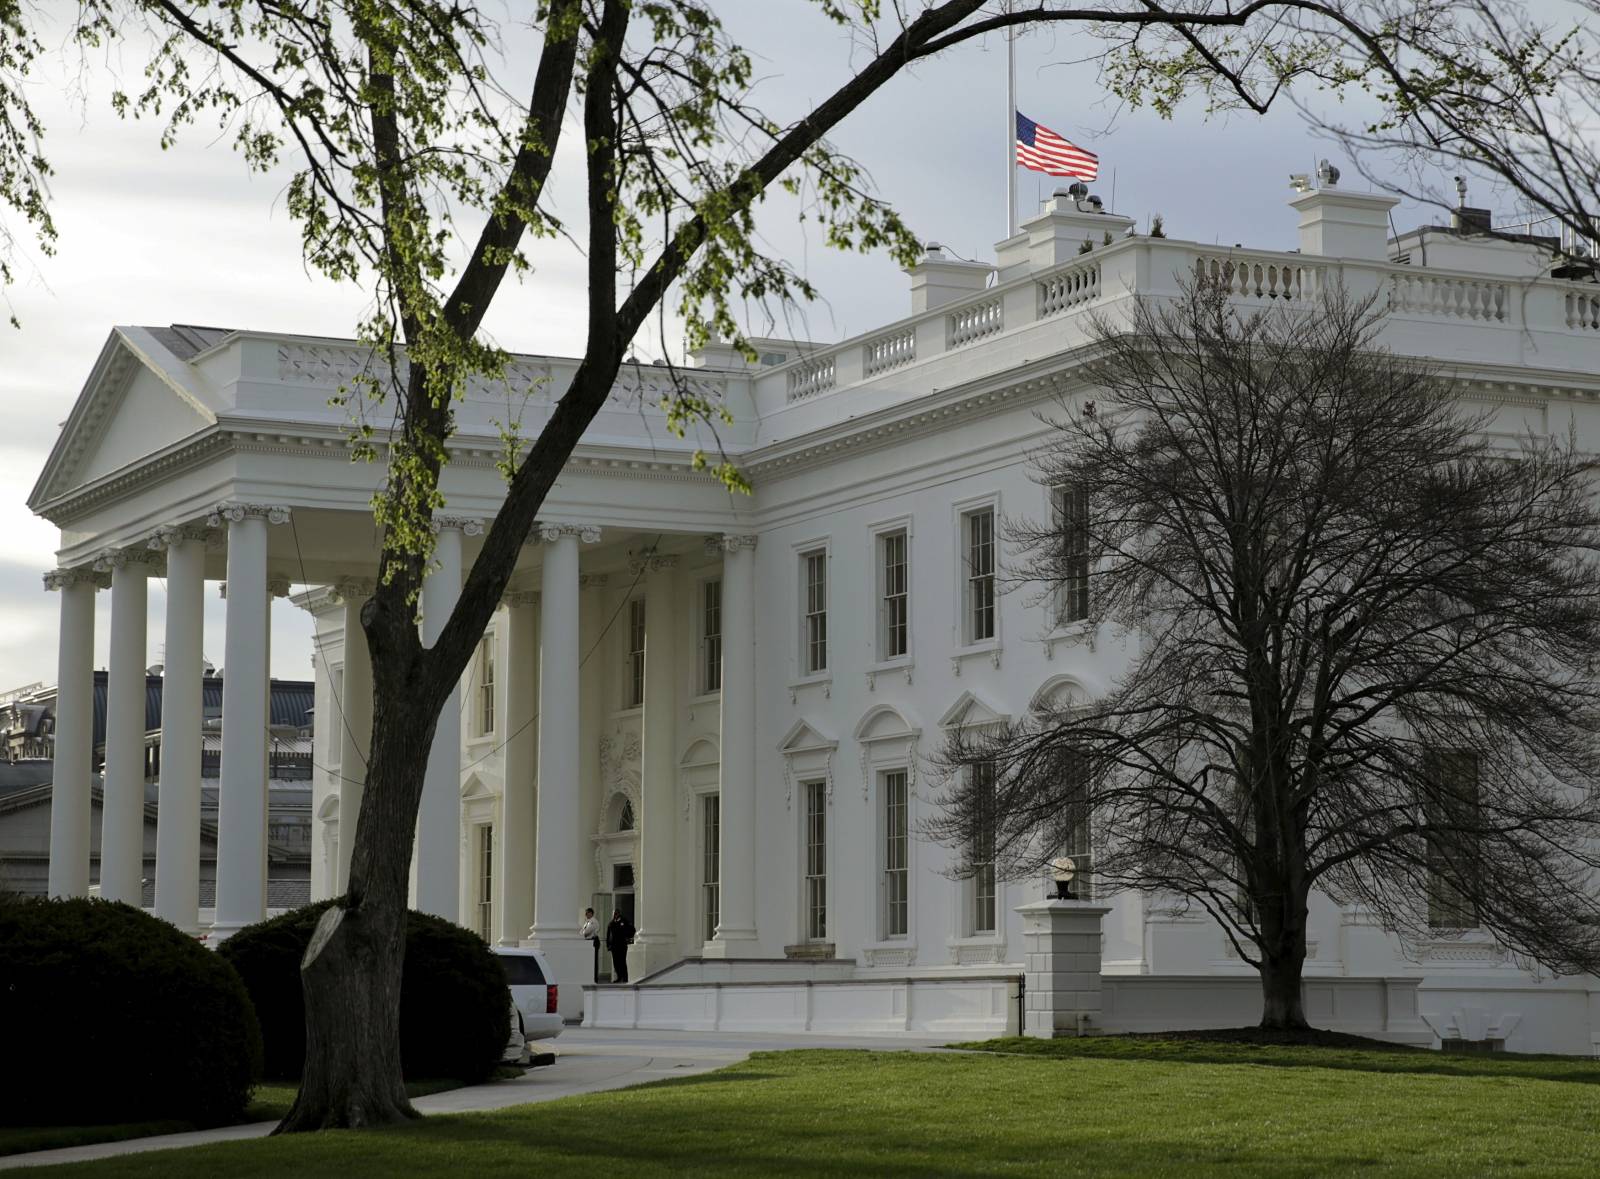 FILE PHOTO: The U.S. flag flies at half-staff at the White House in Washington